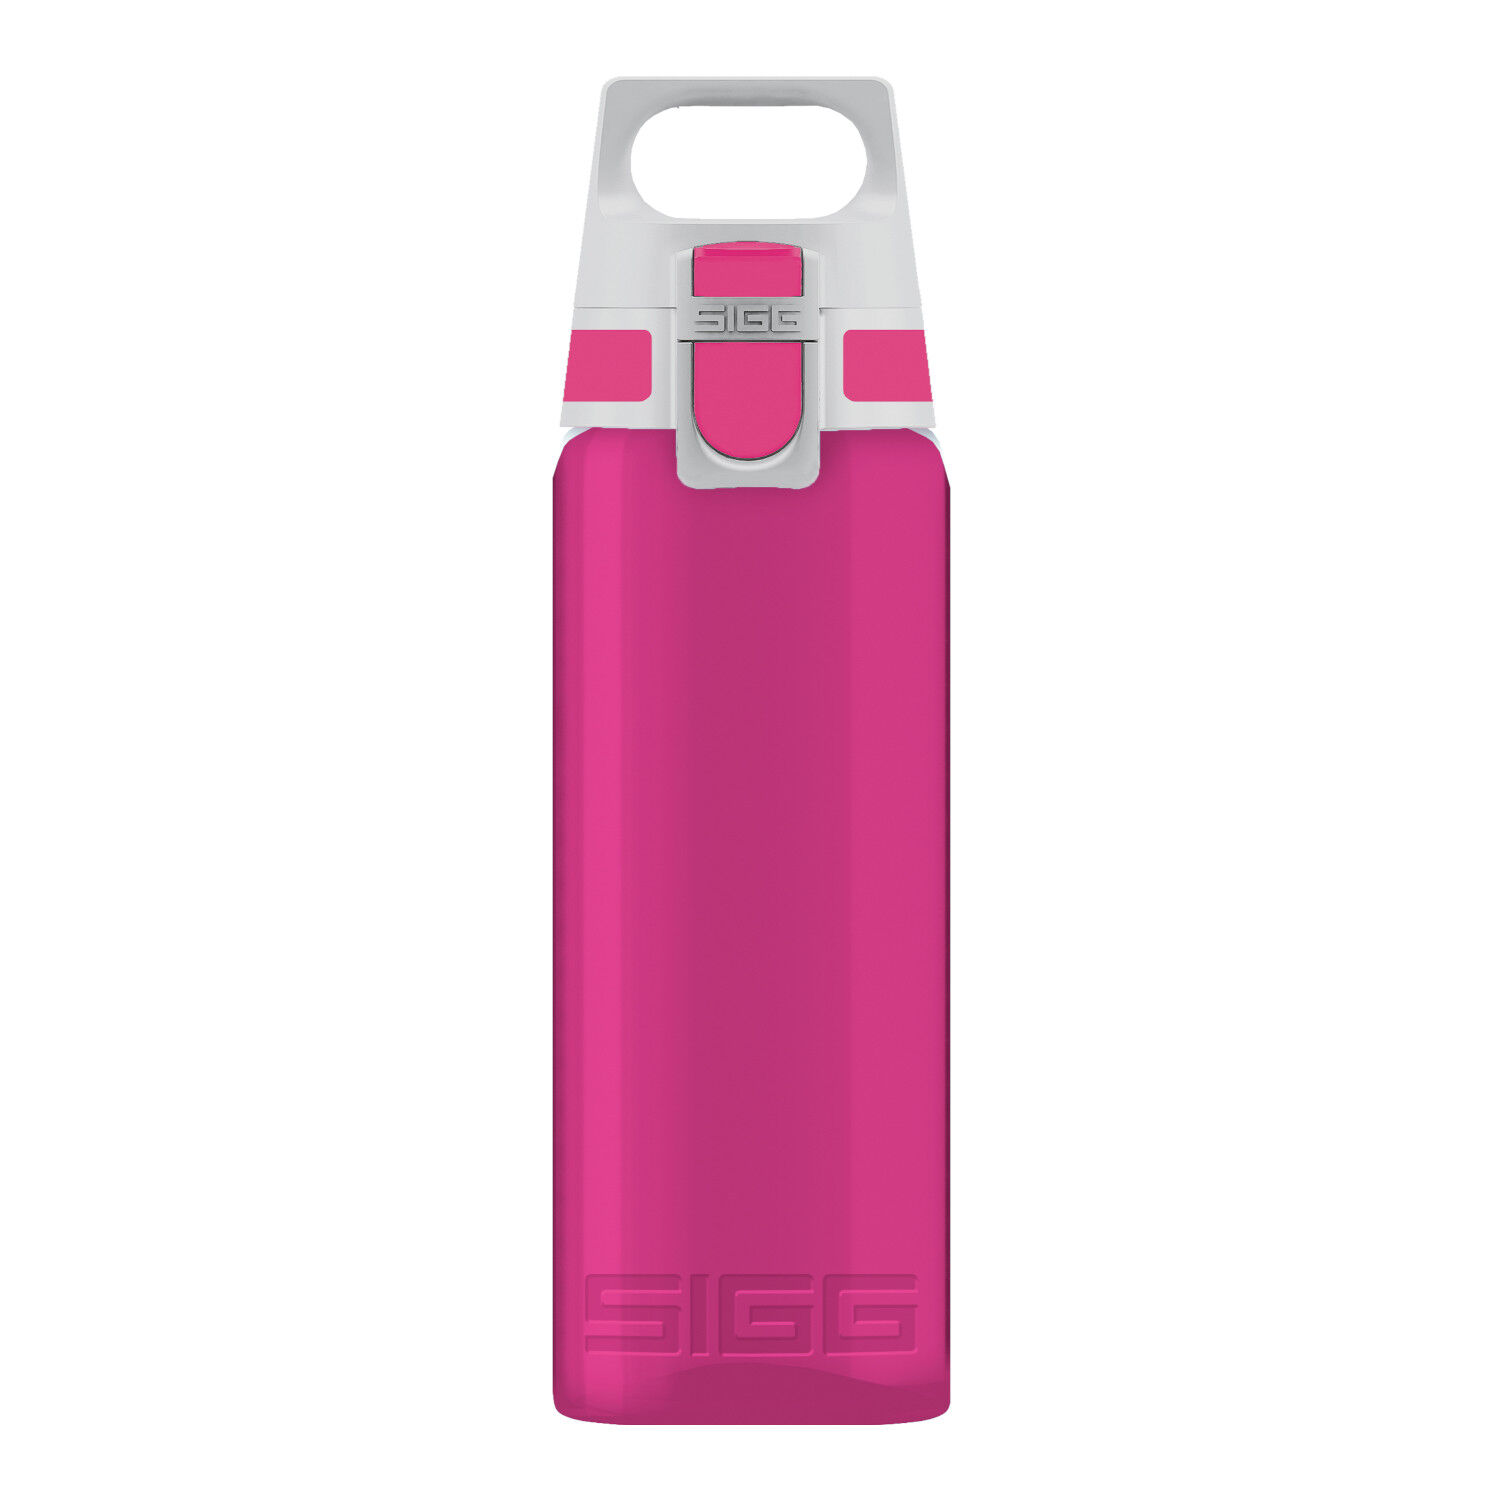 SIGG Total Colour Bottle 600ml (berry)